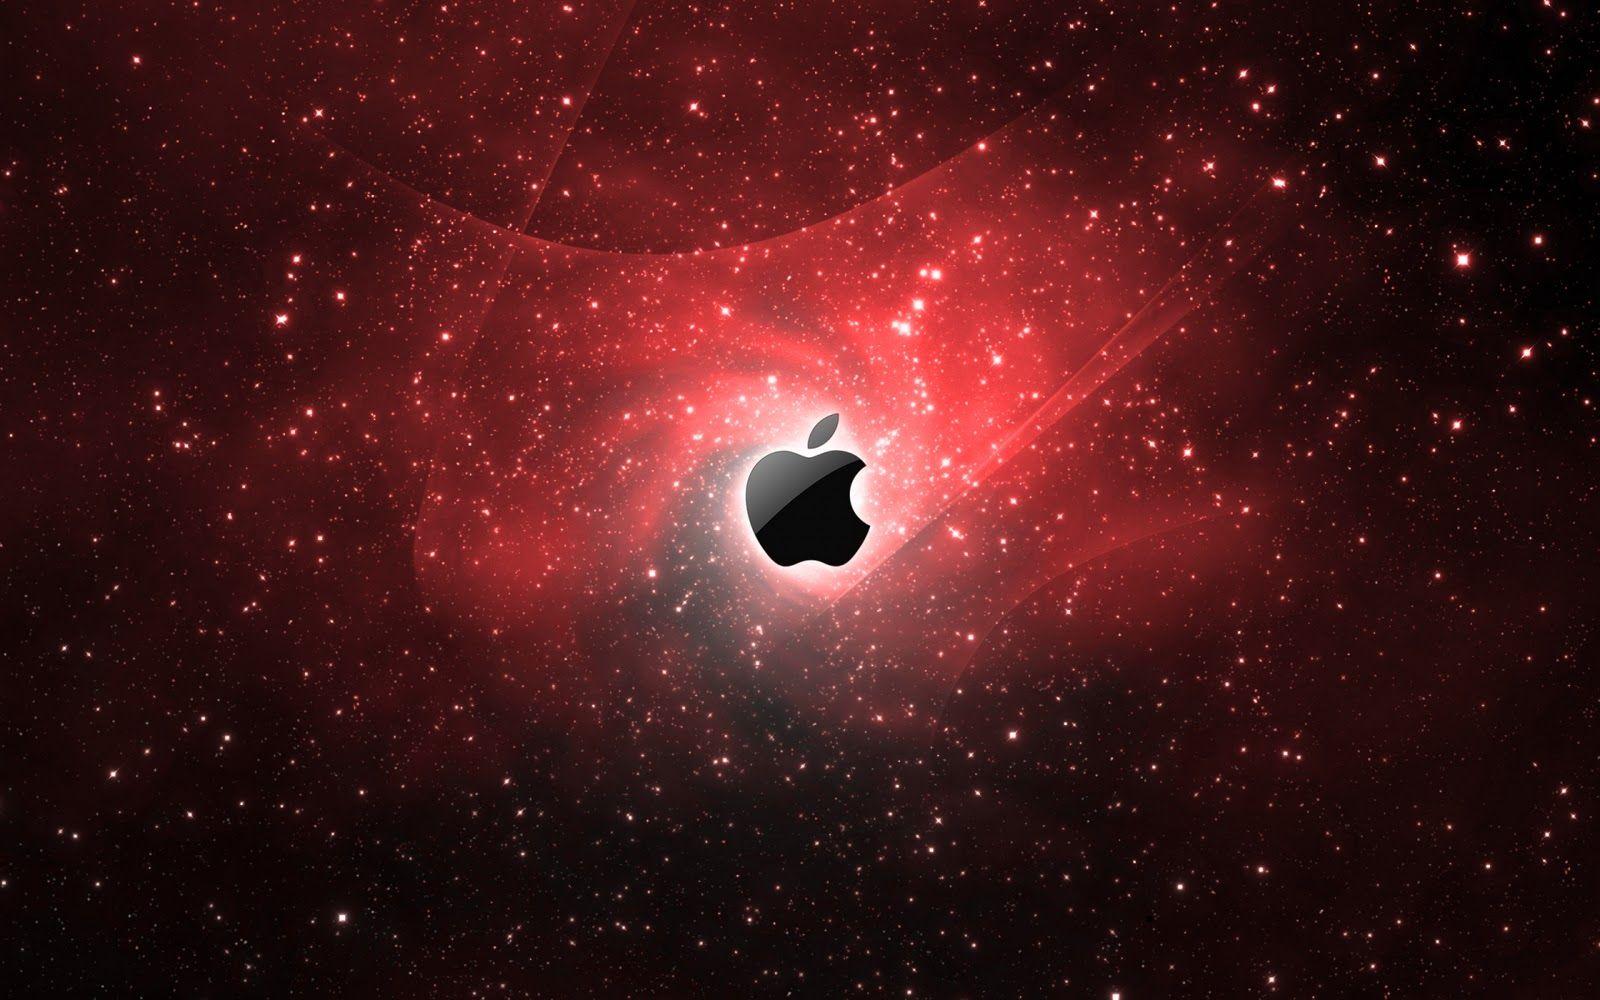 Black and Red Apple Logo - Red Apple Logo Wallpaper , (60+) image collections of wallpapers